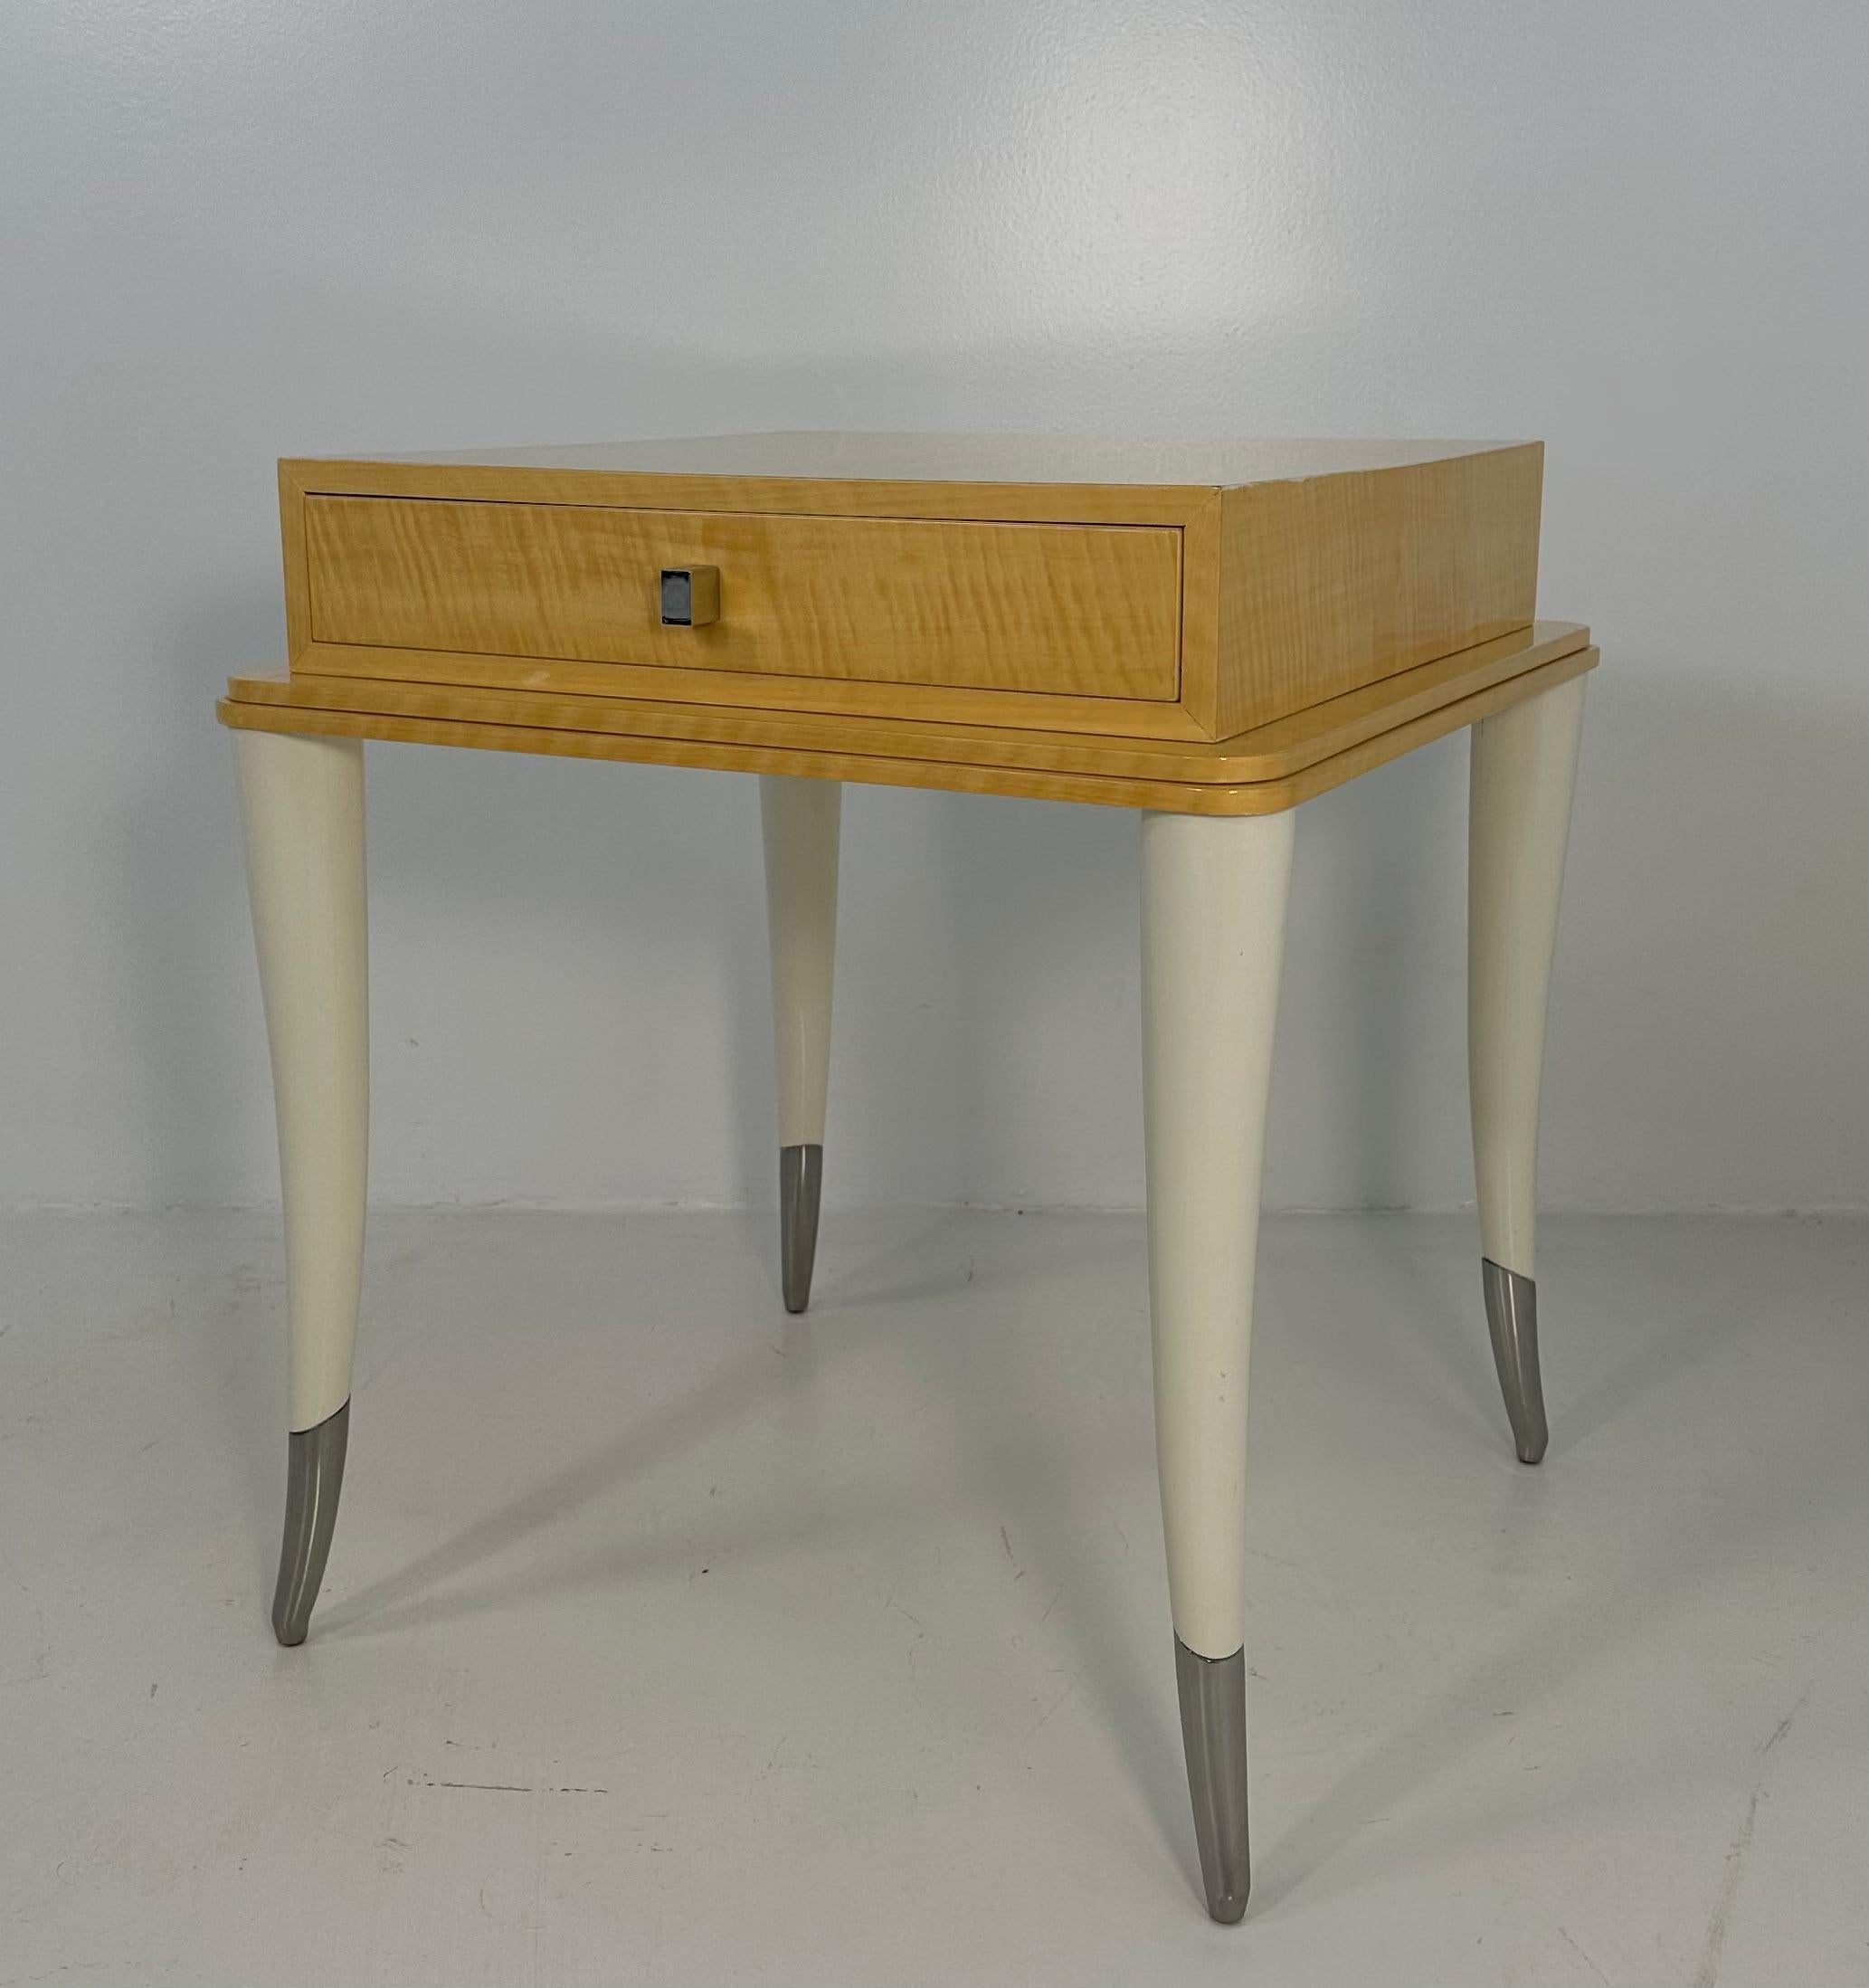 This elegant yet particular and rare side table was produced in Italy in the 1980s. 
The top is in maple wood and lays on four cream lacquered legs. 
The interiors are in cream colored velvet, while the tips of the legs and the handles are in